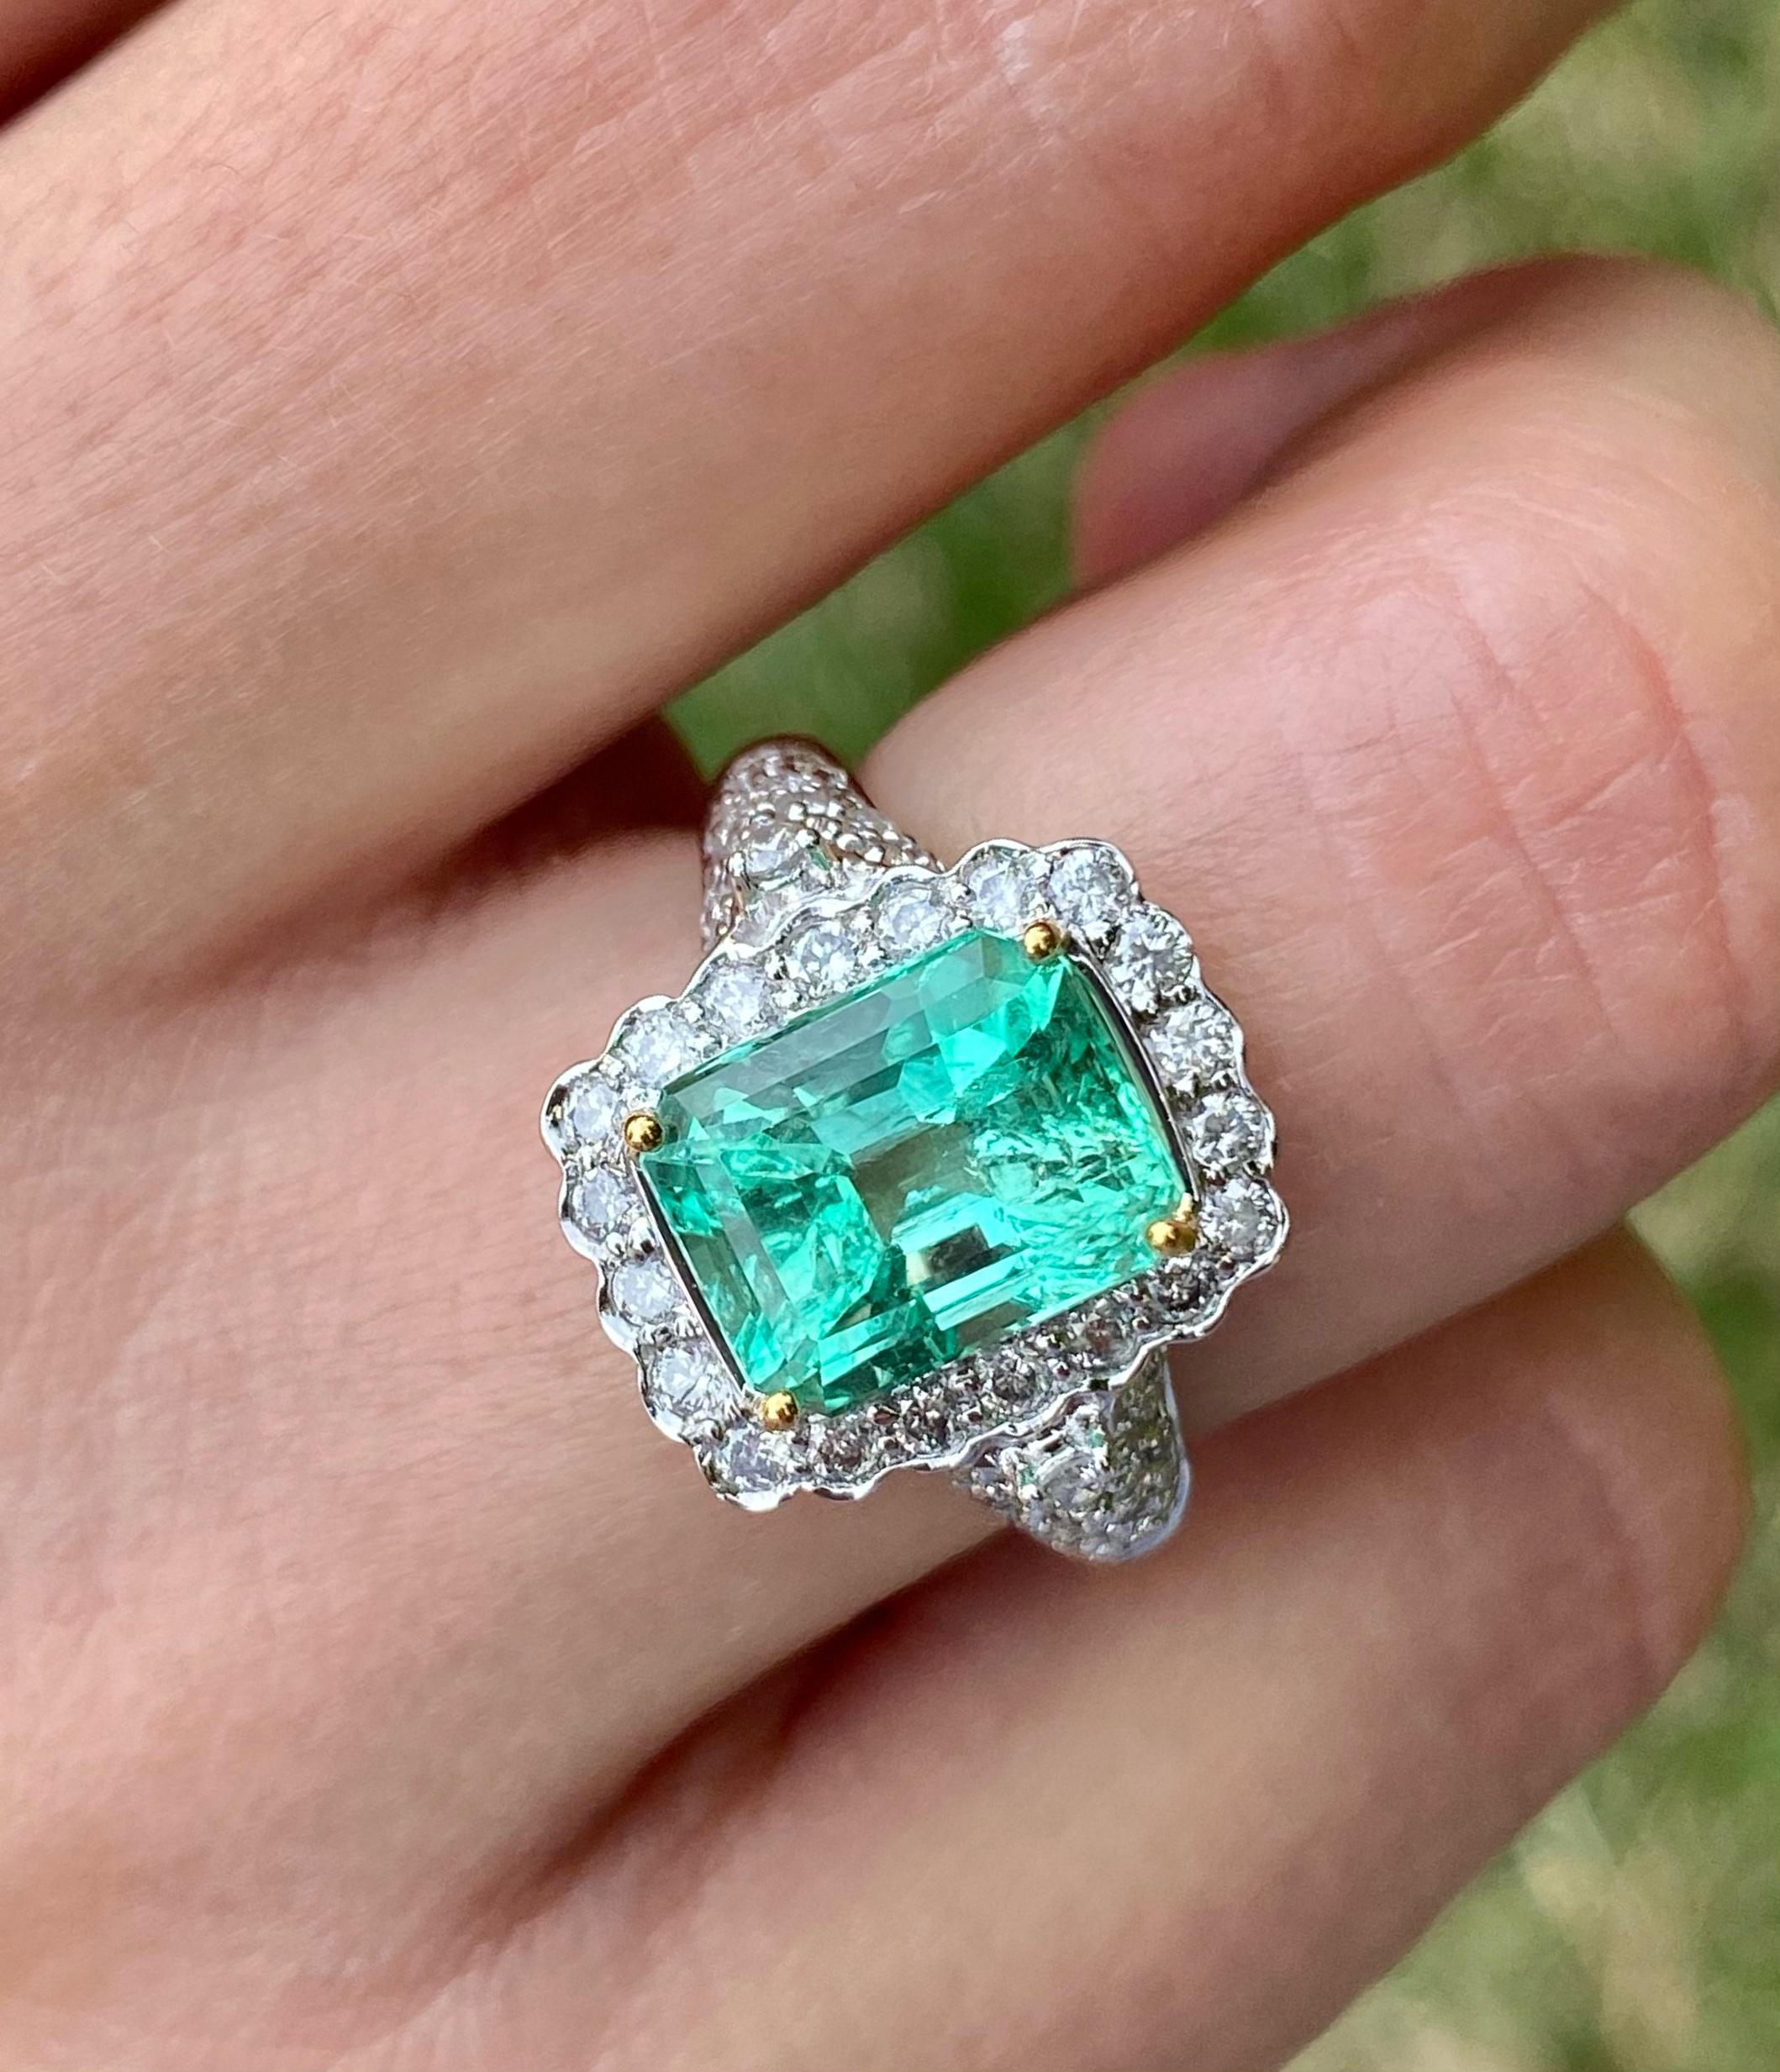 3.58 Carat Emerald-Cut Colombian Emerald in 18 Karat White Gold Ring For Sale 3